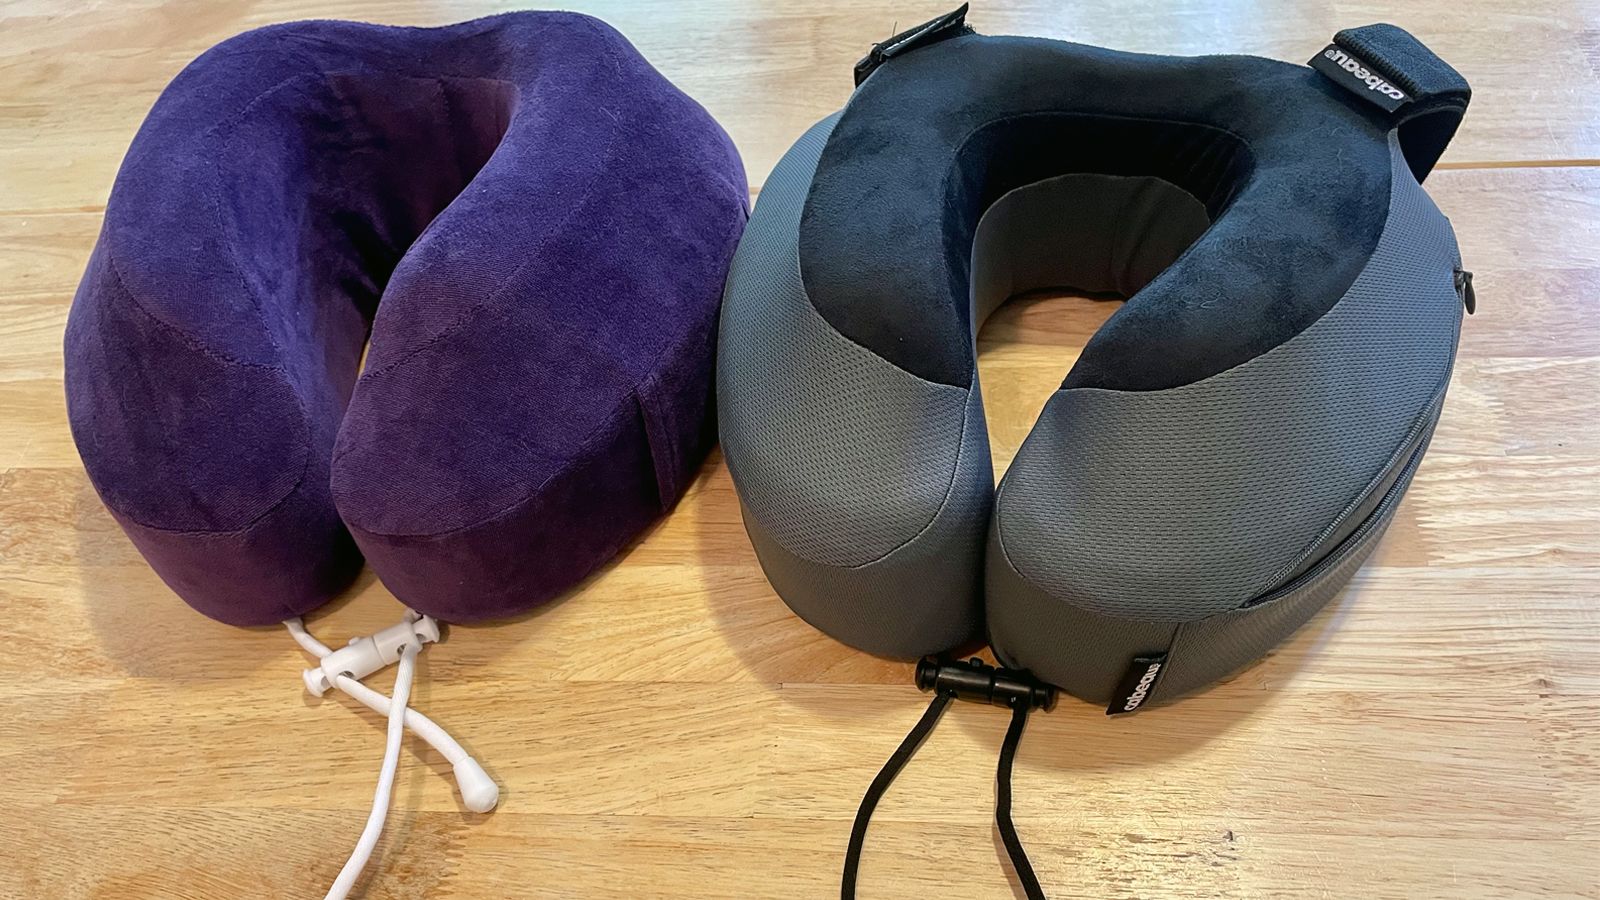 Kimiandy Inflatable Travel Pillow For Airplane